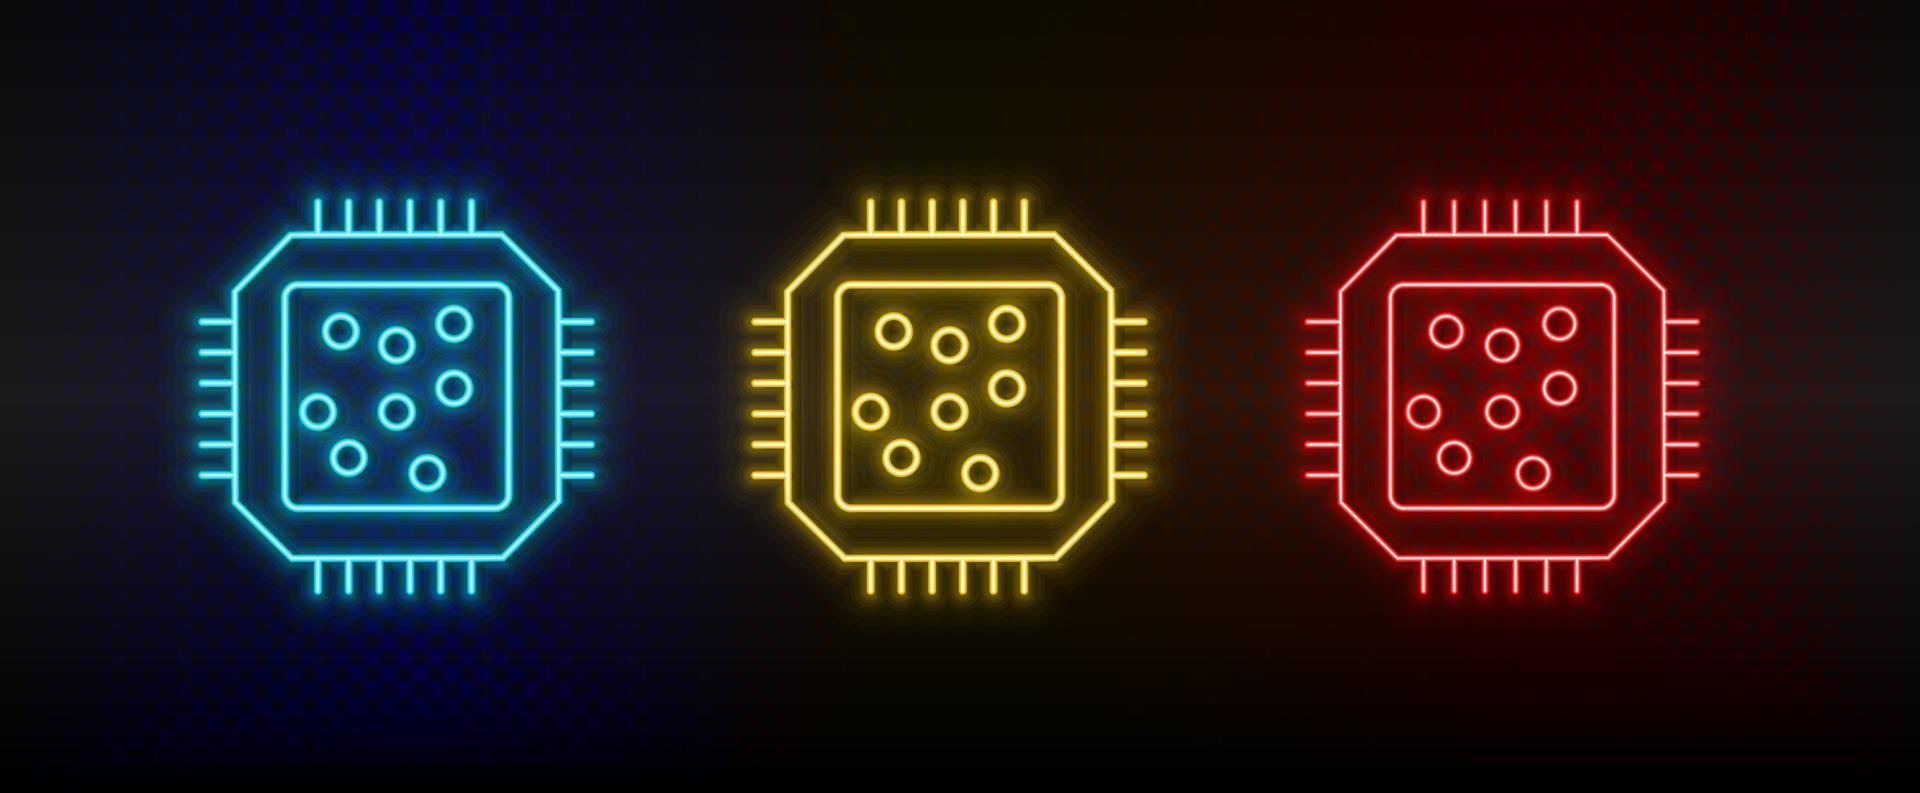 Neon icon set Cpu hardware. Set of red, blue, yellow neon vector icon on transparency dark background